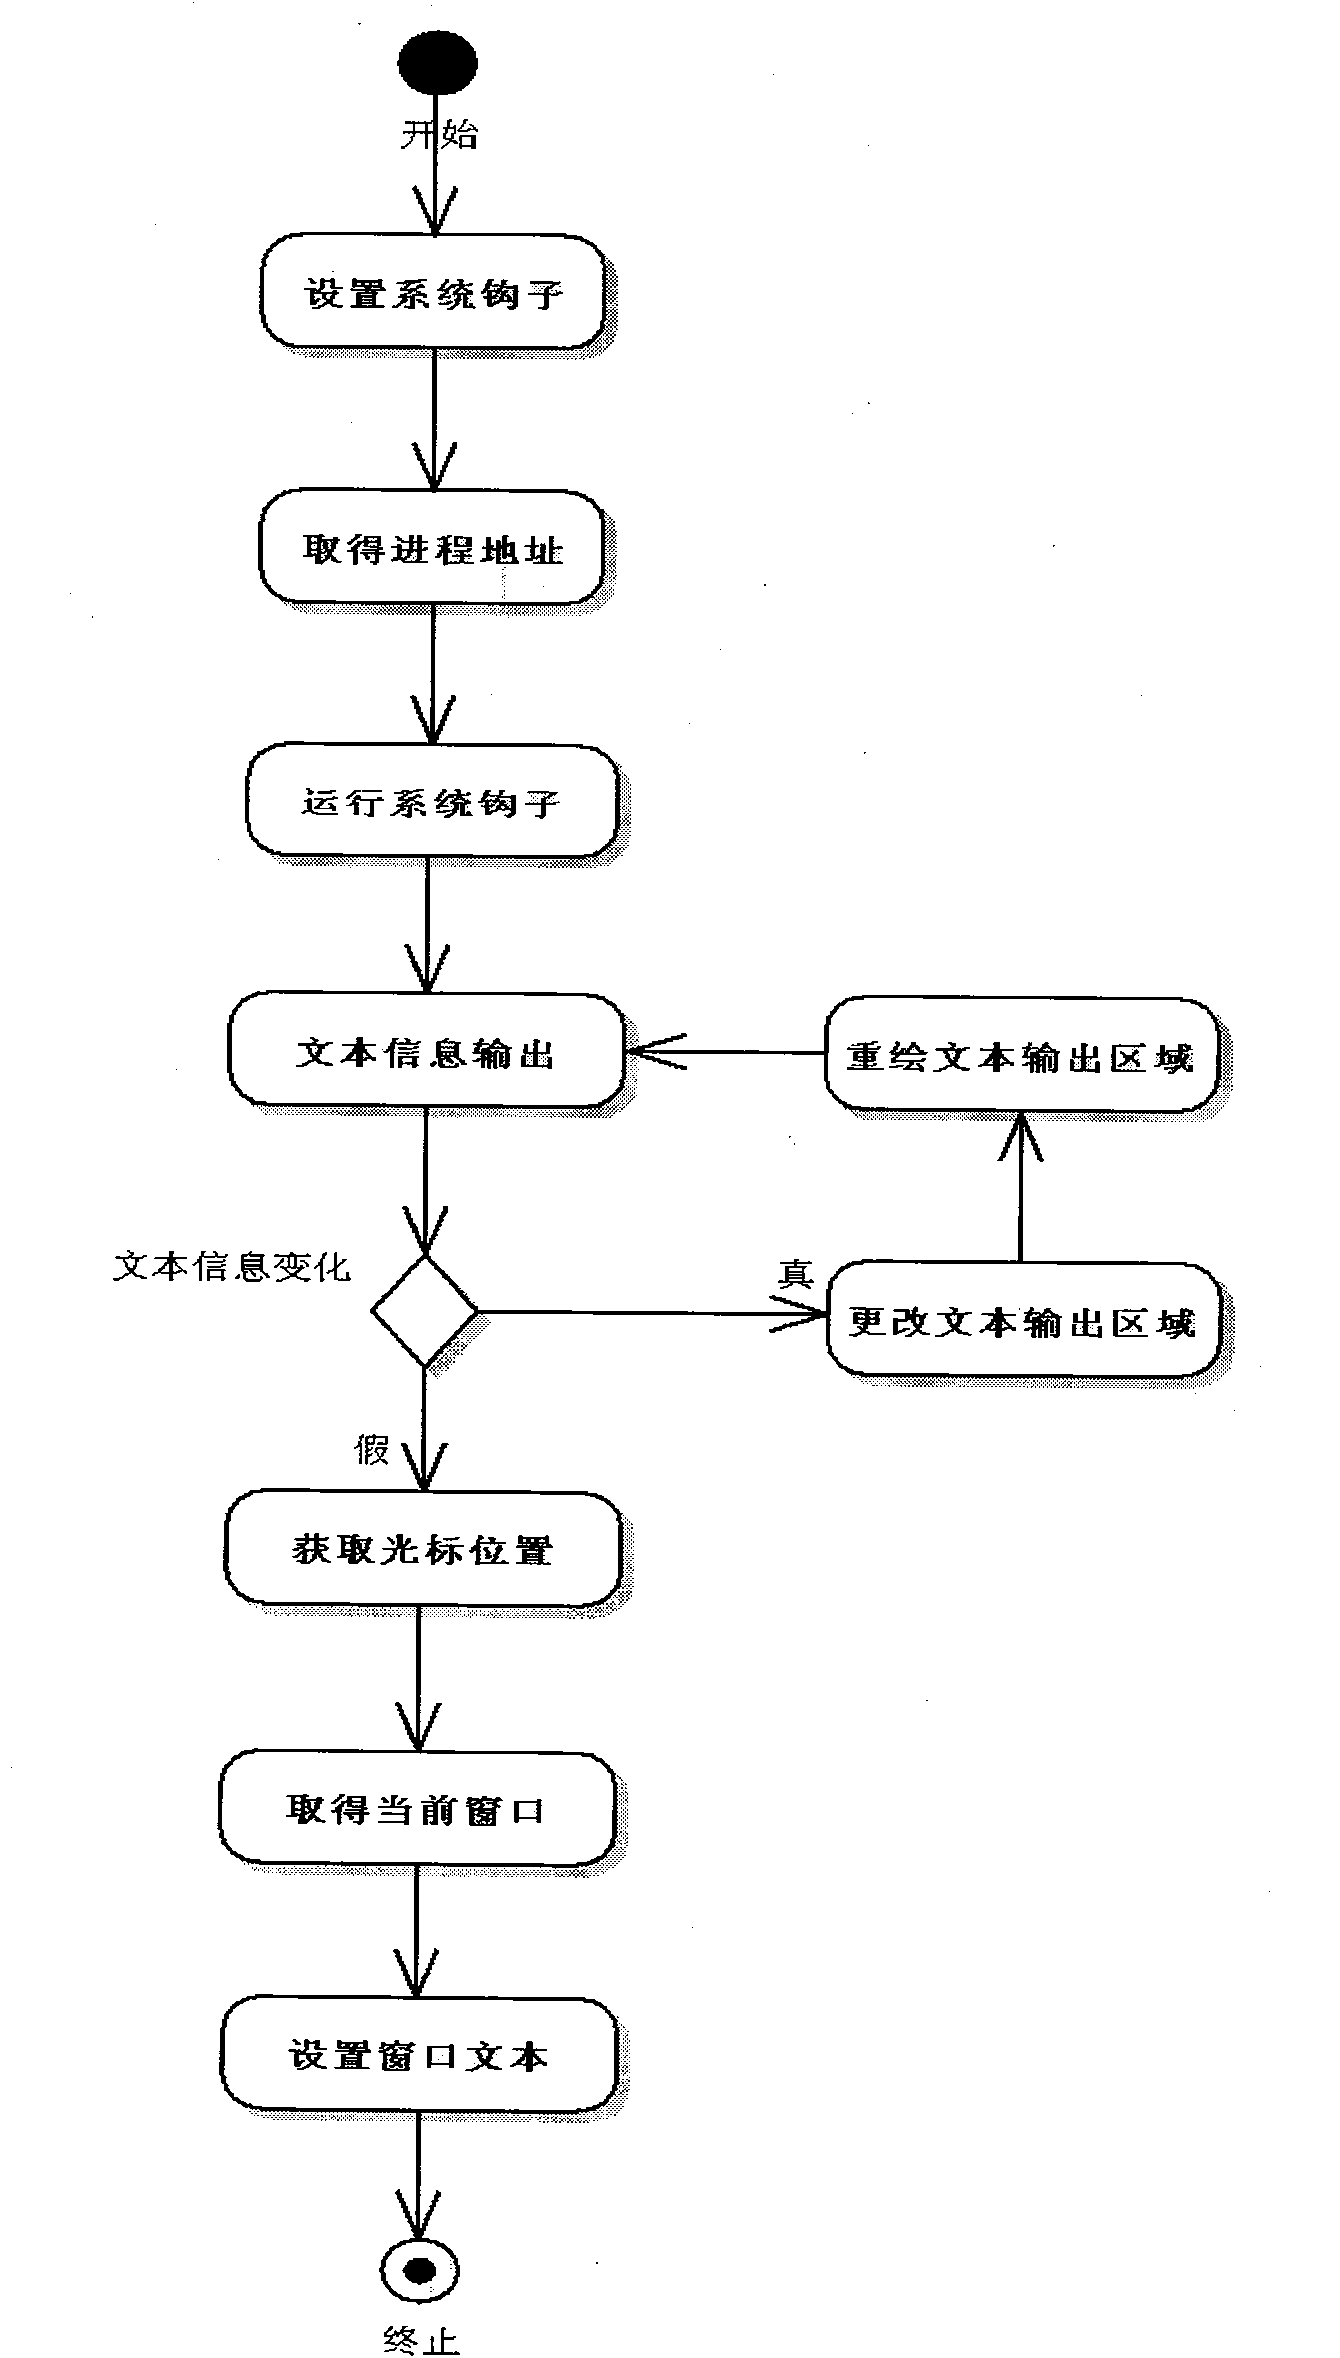 Method for extracting computer screen information for medical administration